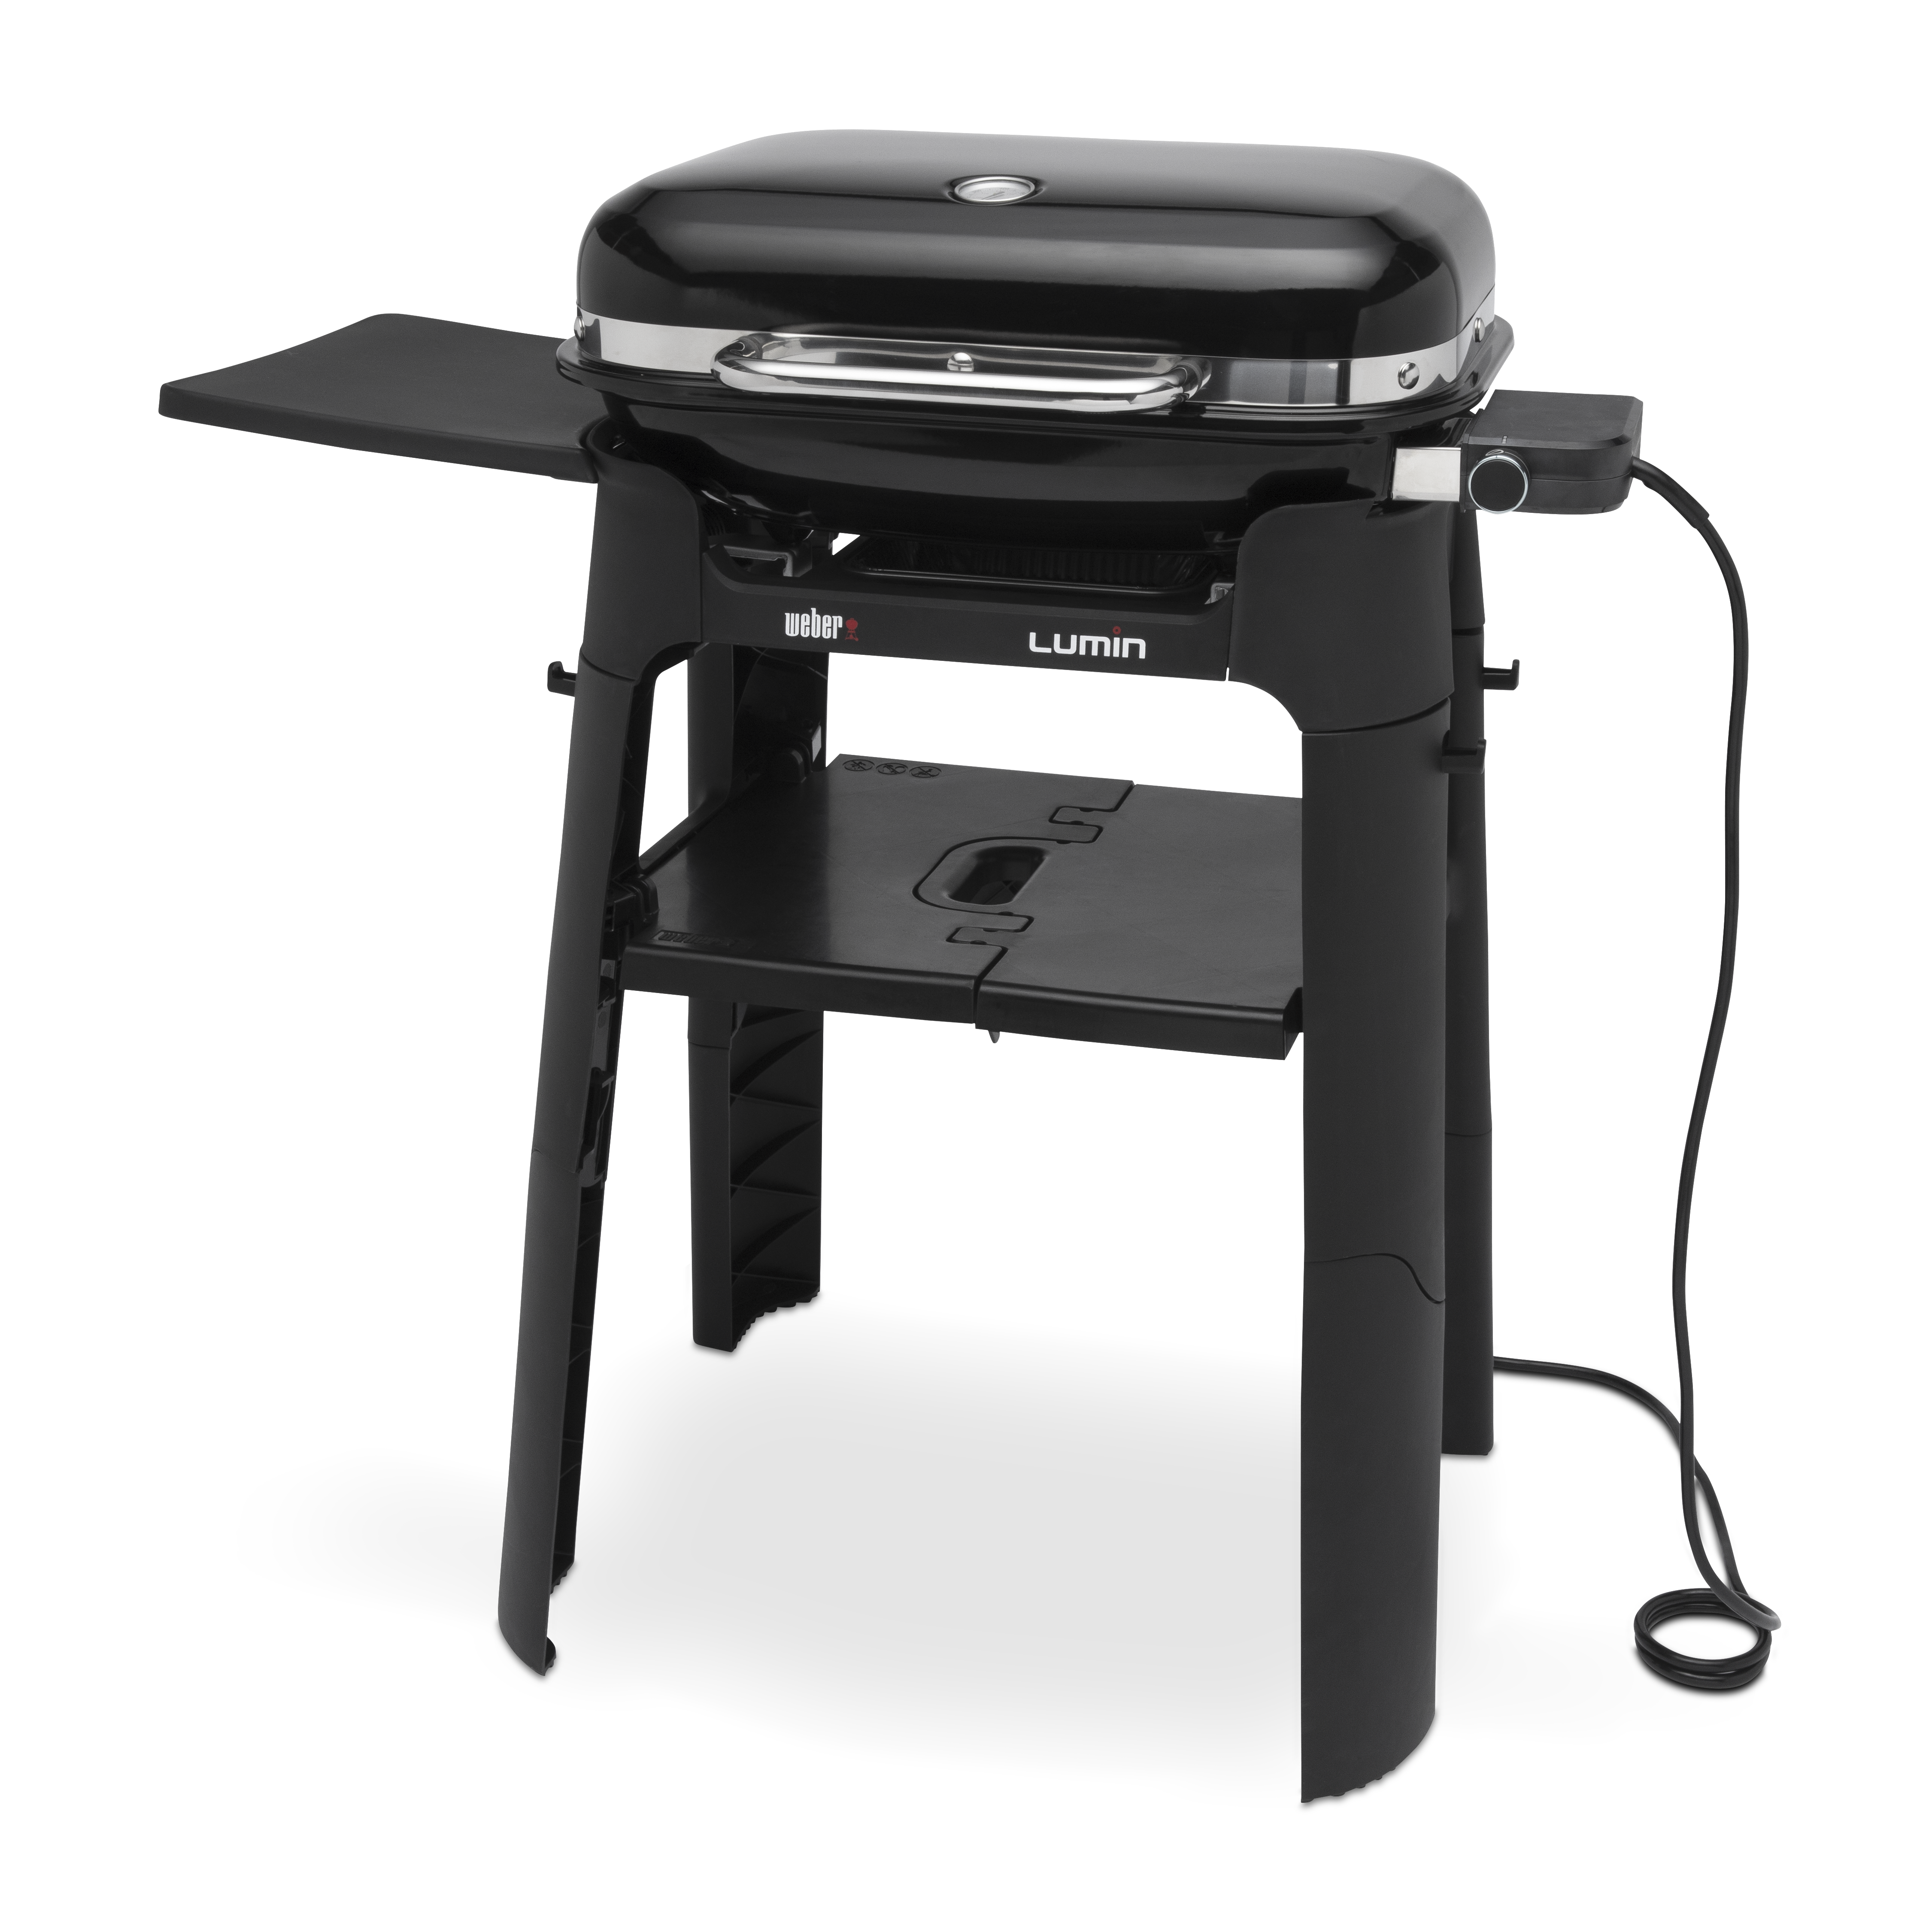 LUMIN BLACK WEBER ELECTRIC BBQ WITH TROLLEY INCLUDED